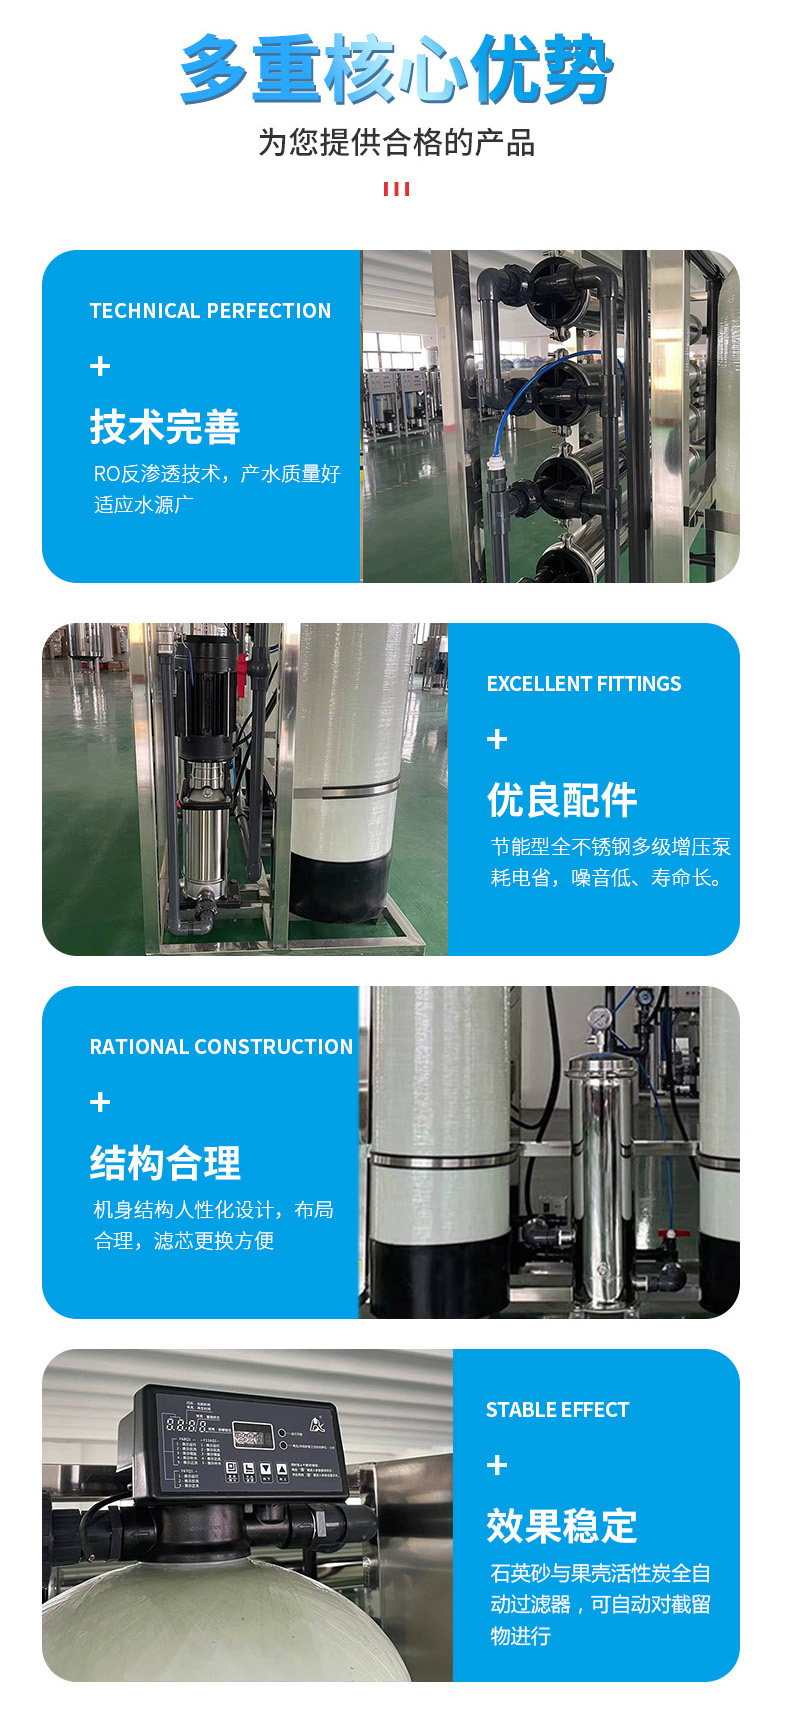 Water treatment equipment: large-scale industrial purified water, direct drinking water, purified water, commercial purified water equipment, RO reverse osmosis